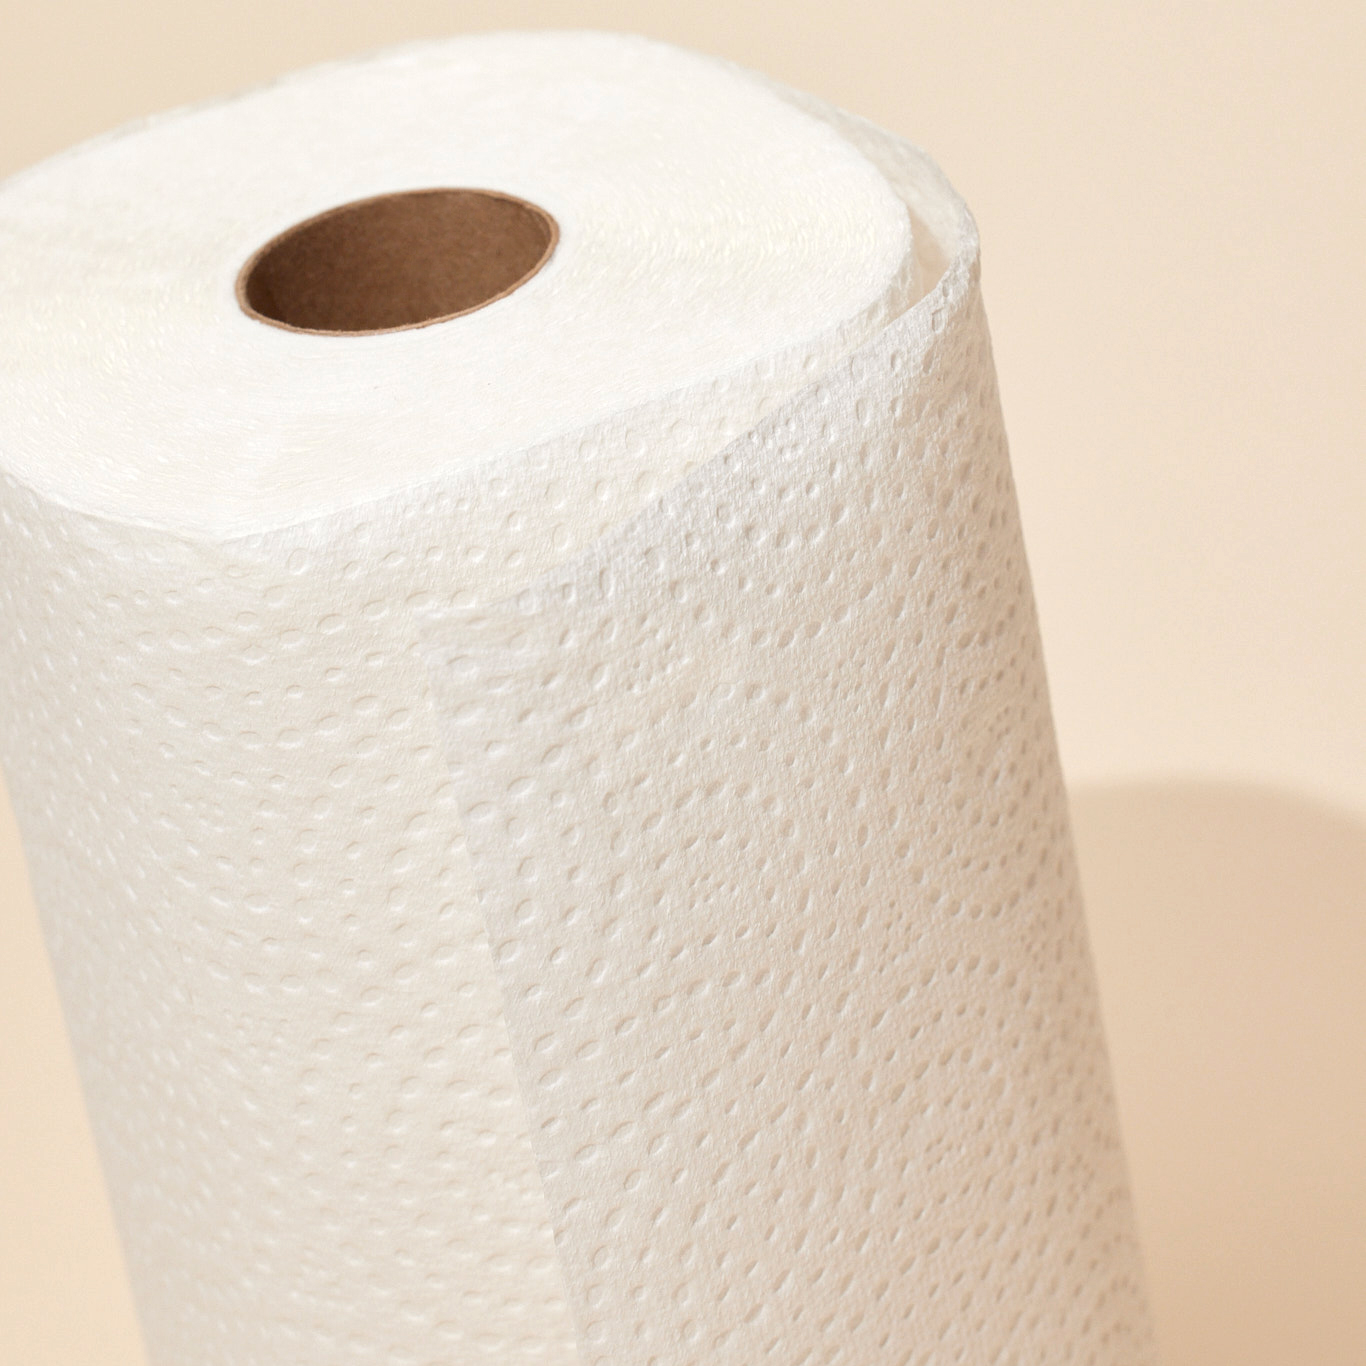 Bamboo Paper Towels - 100% Tree-Free & Unbleached